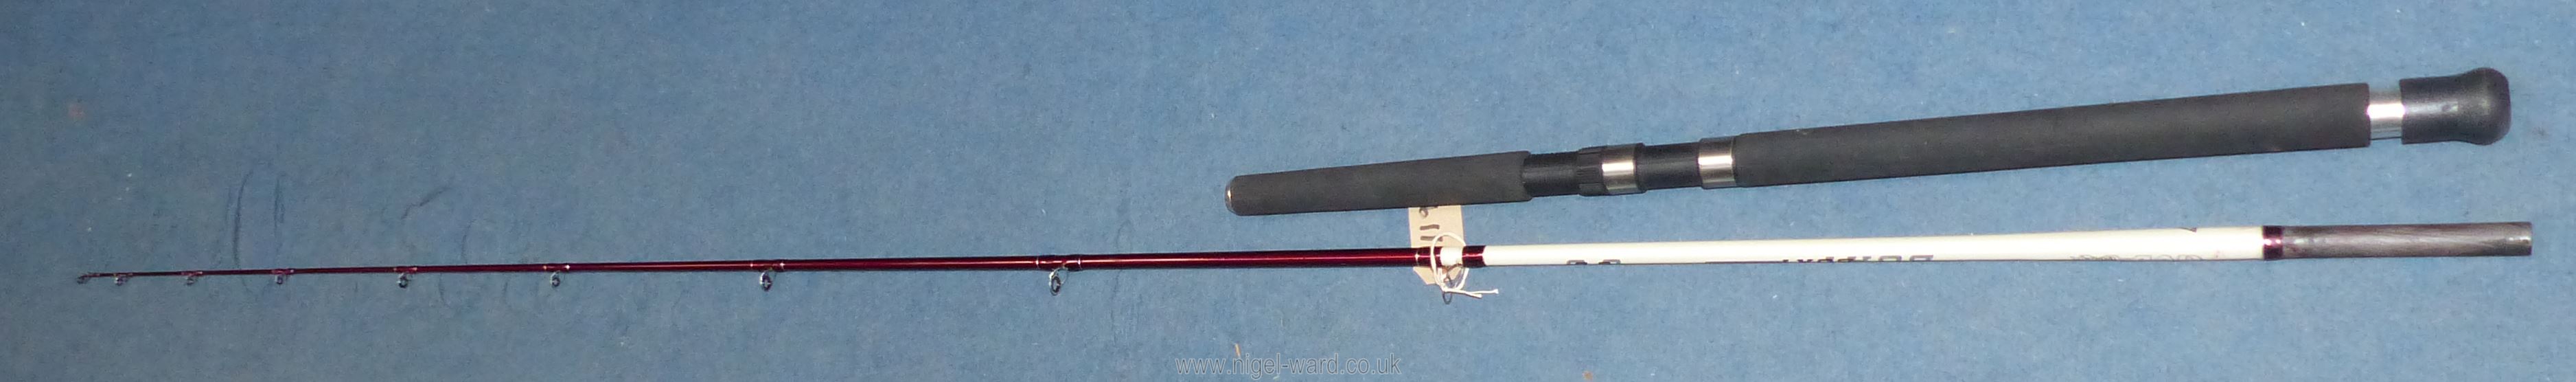 An 'Imax' 8' 6'' long two piece Boat Rod, in long zipped protective tube, in very good condition. - Image 2 of 3